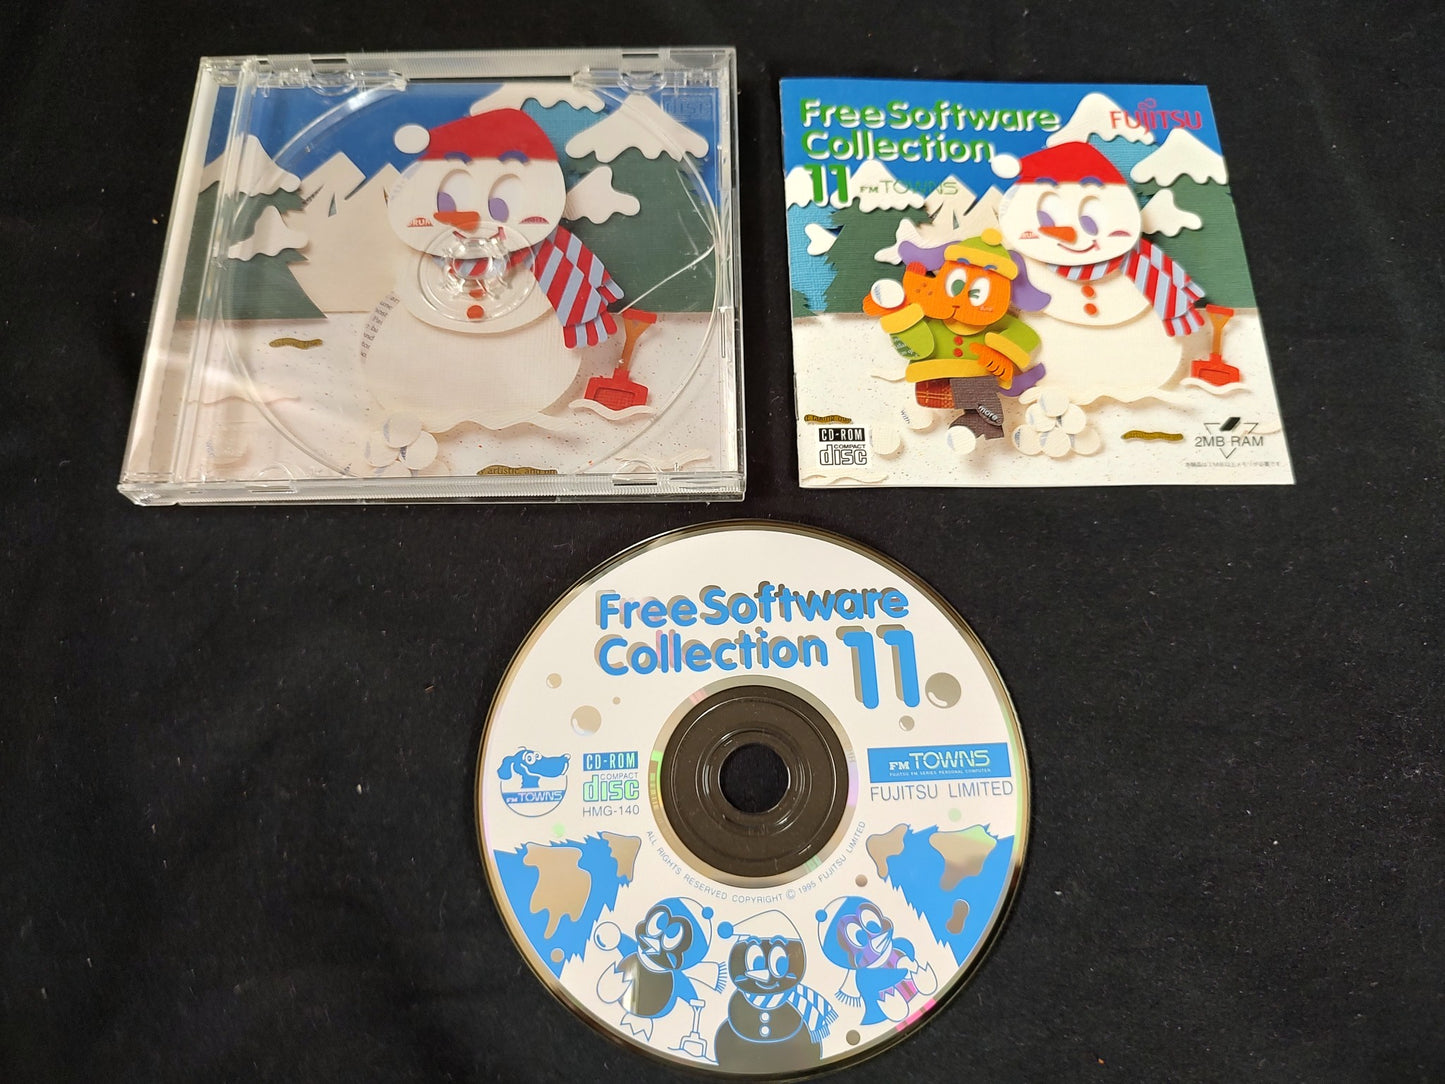 FM TOWNS Free Software collections 4-11 Boxed set Fujitsu Marty 